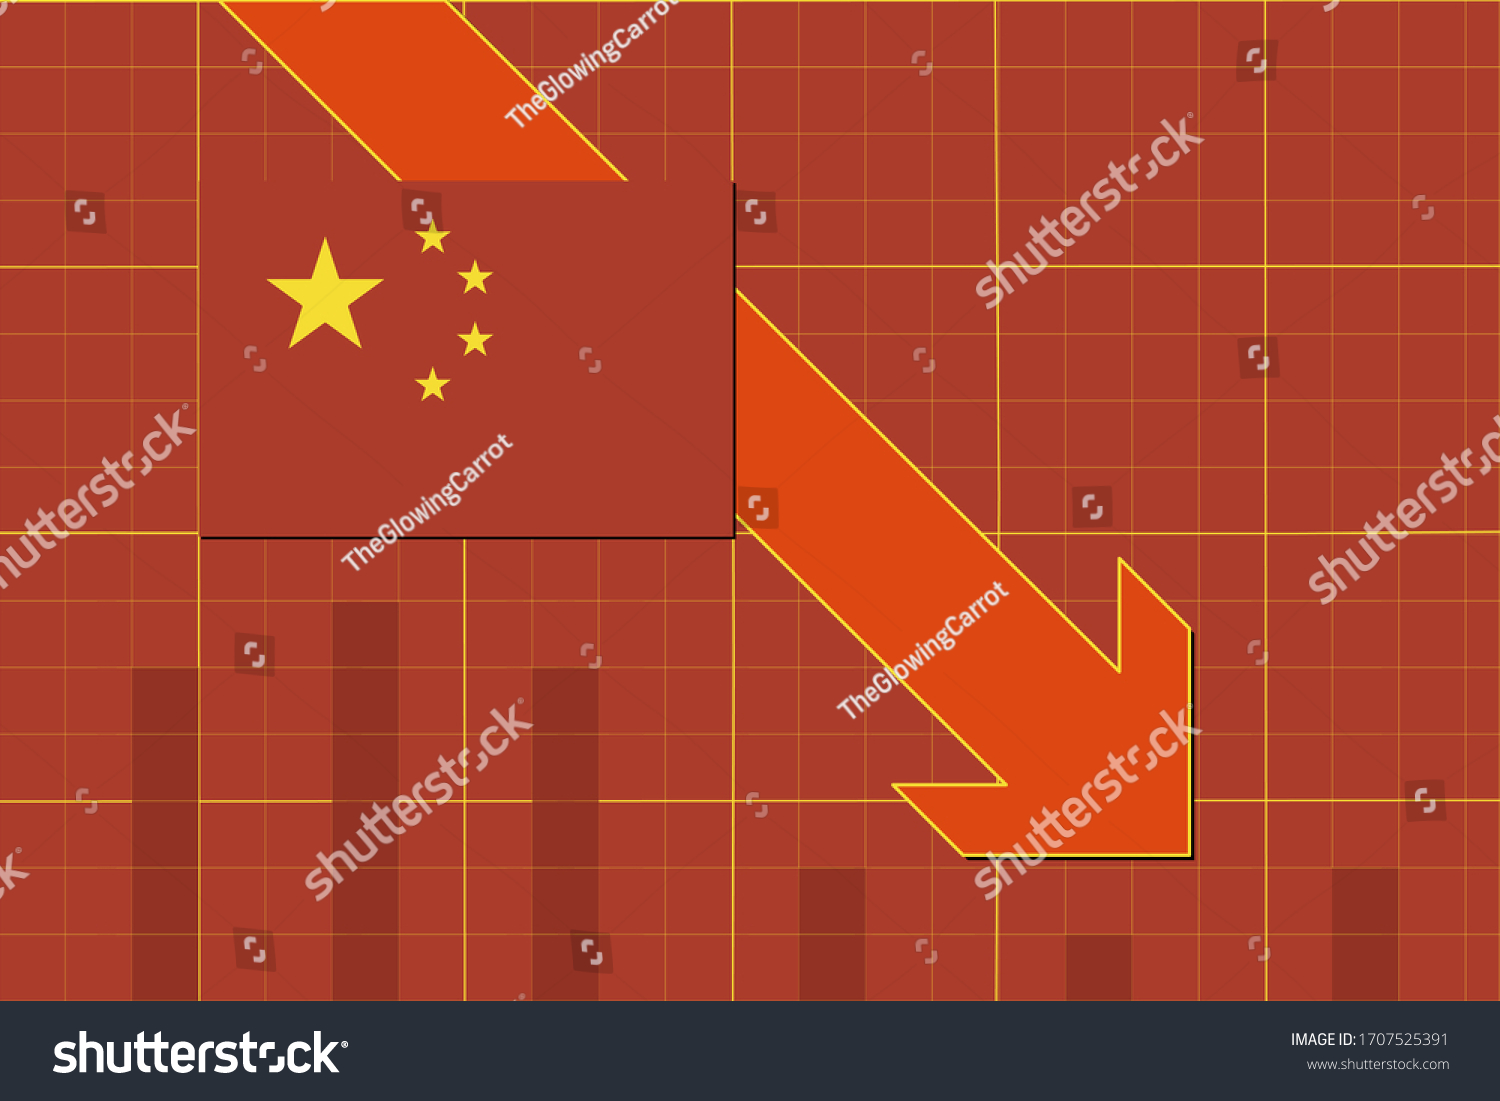 SVG of Info graph chart showing the flag of China and red arrow going down representing economic decline.  svg